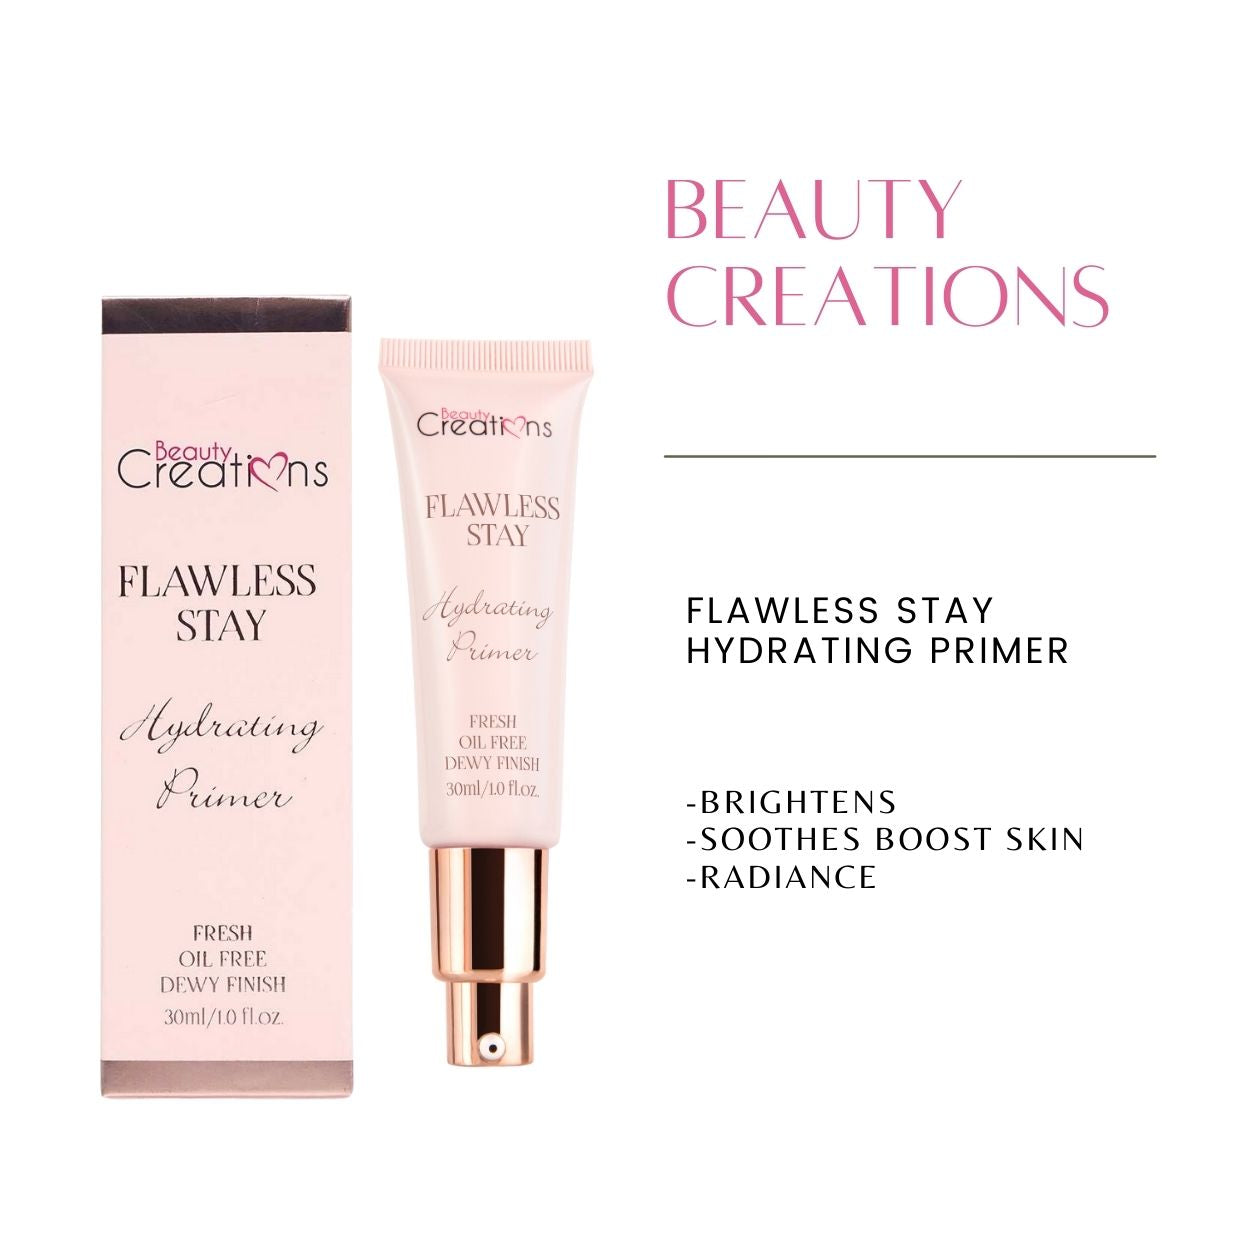 Beauty Creations, Flawless Stay Hydrating Primer